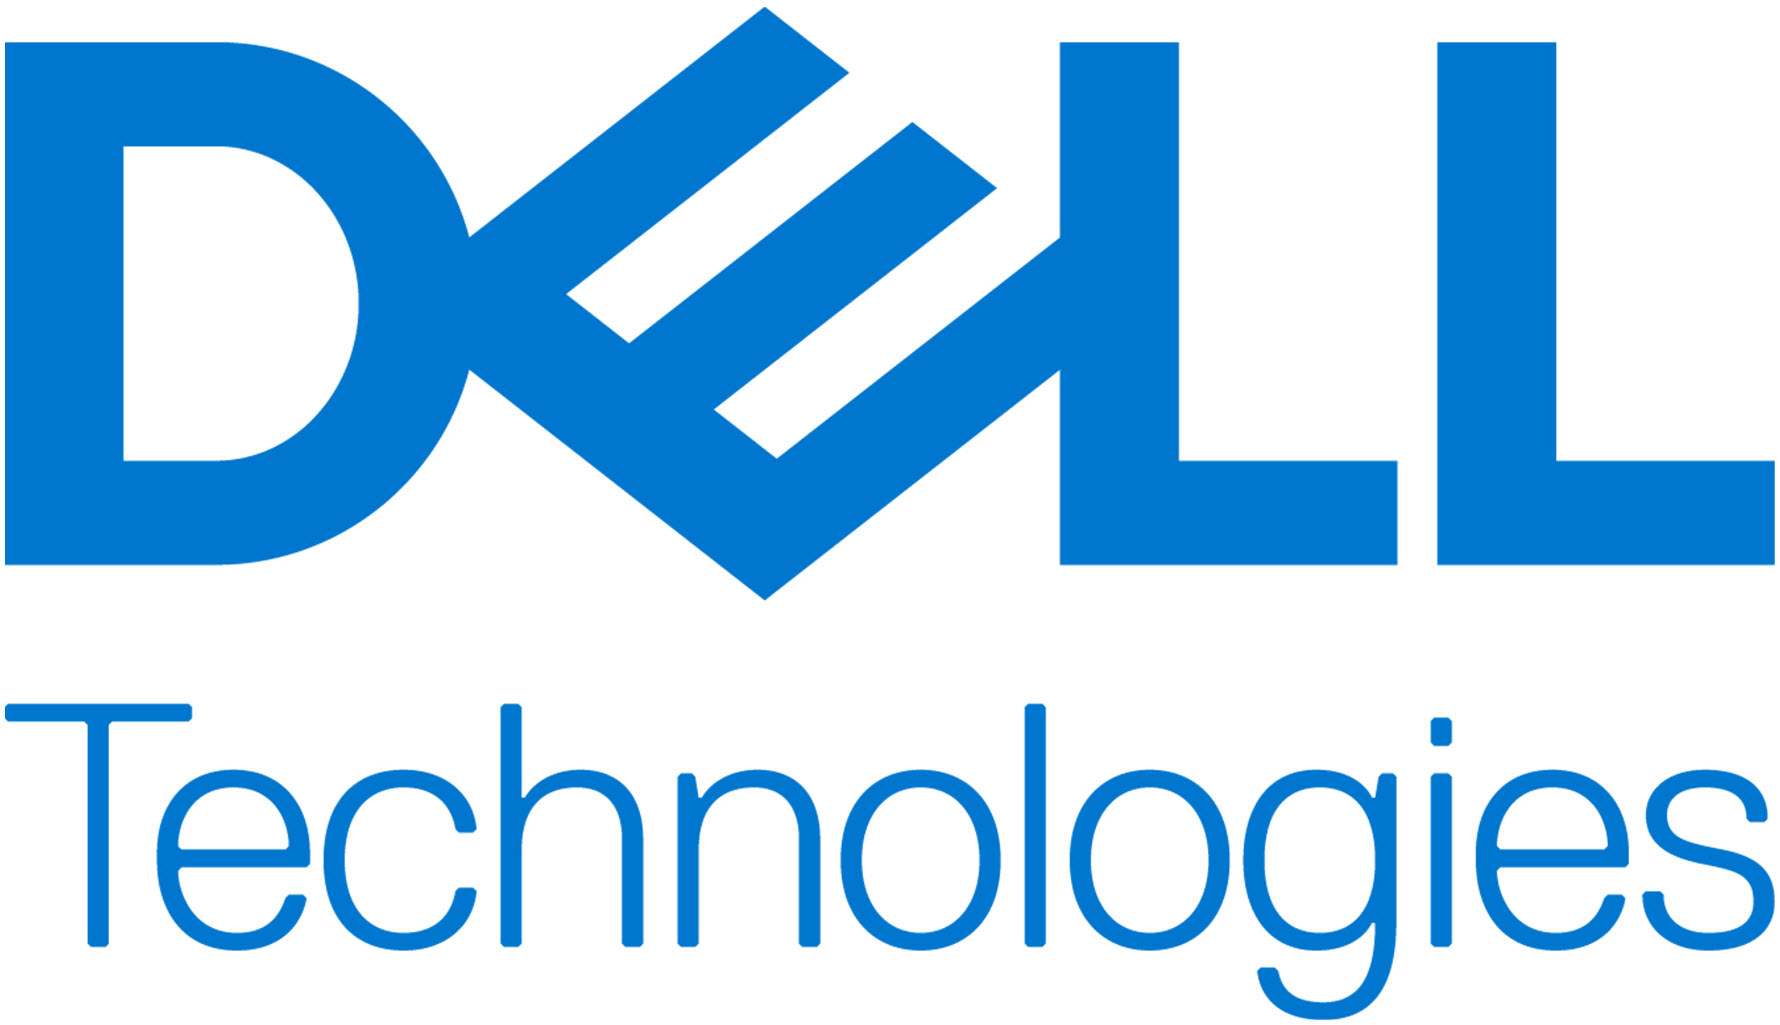 Dell Technologies Surpasses Expectations with $22.93 Billion in Quarterly Revenue, Signaling Tech Spending Recovery